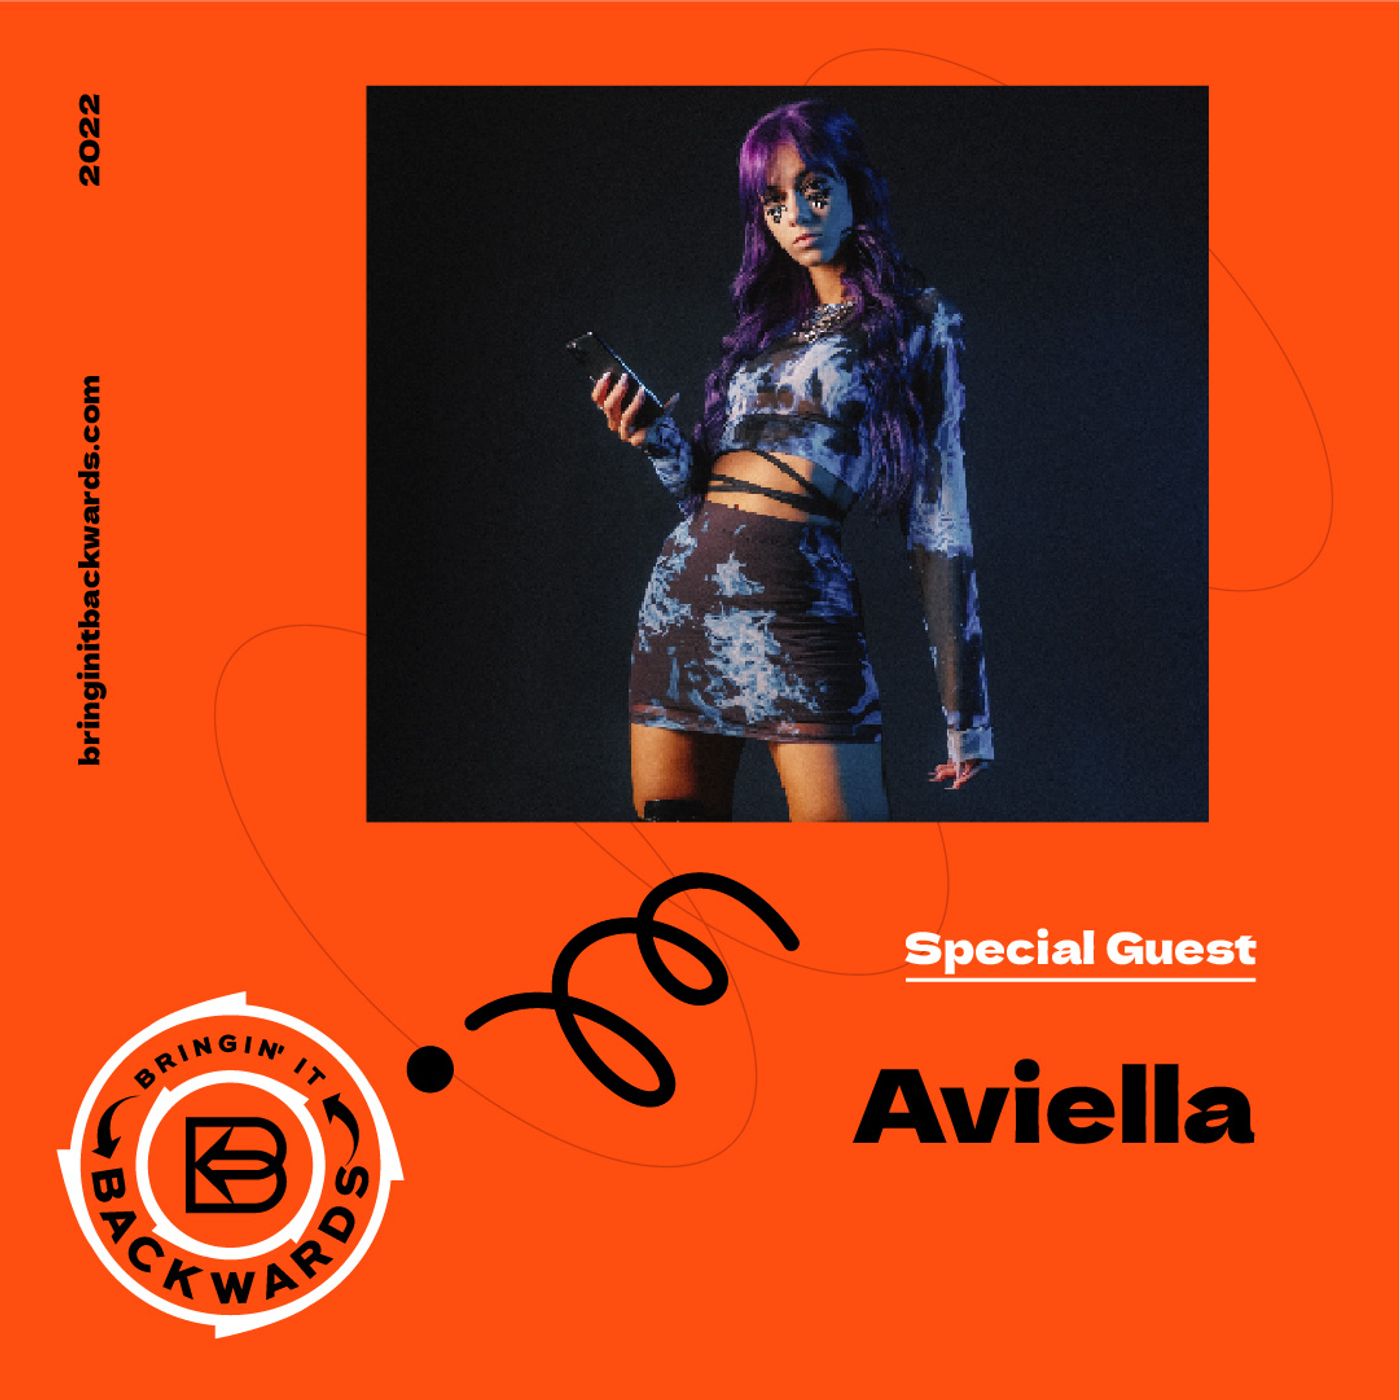 Interview with Aviella Image